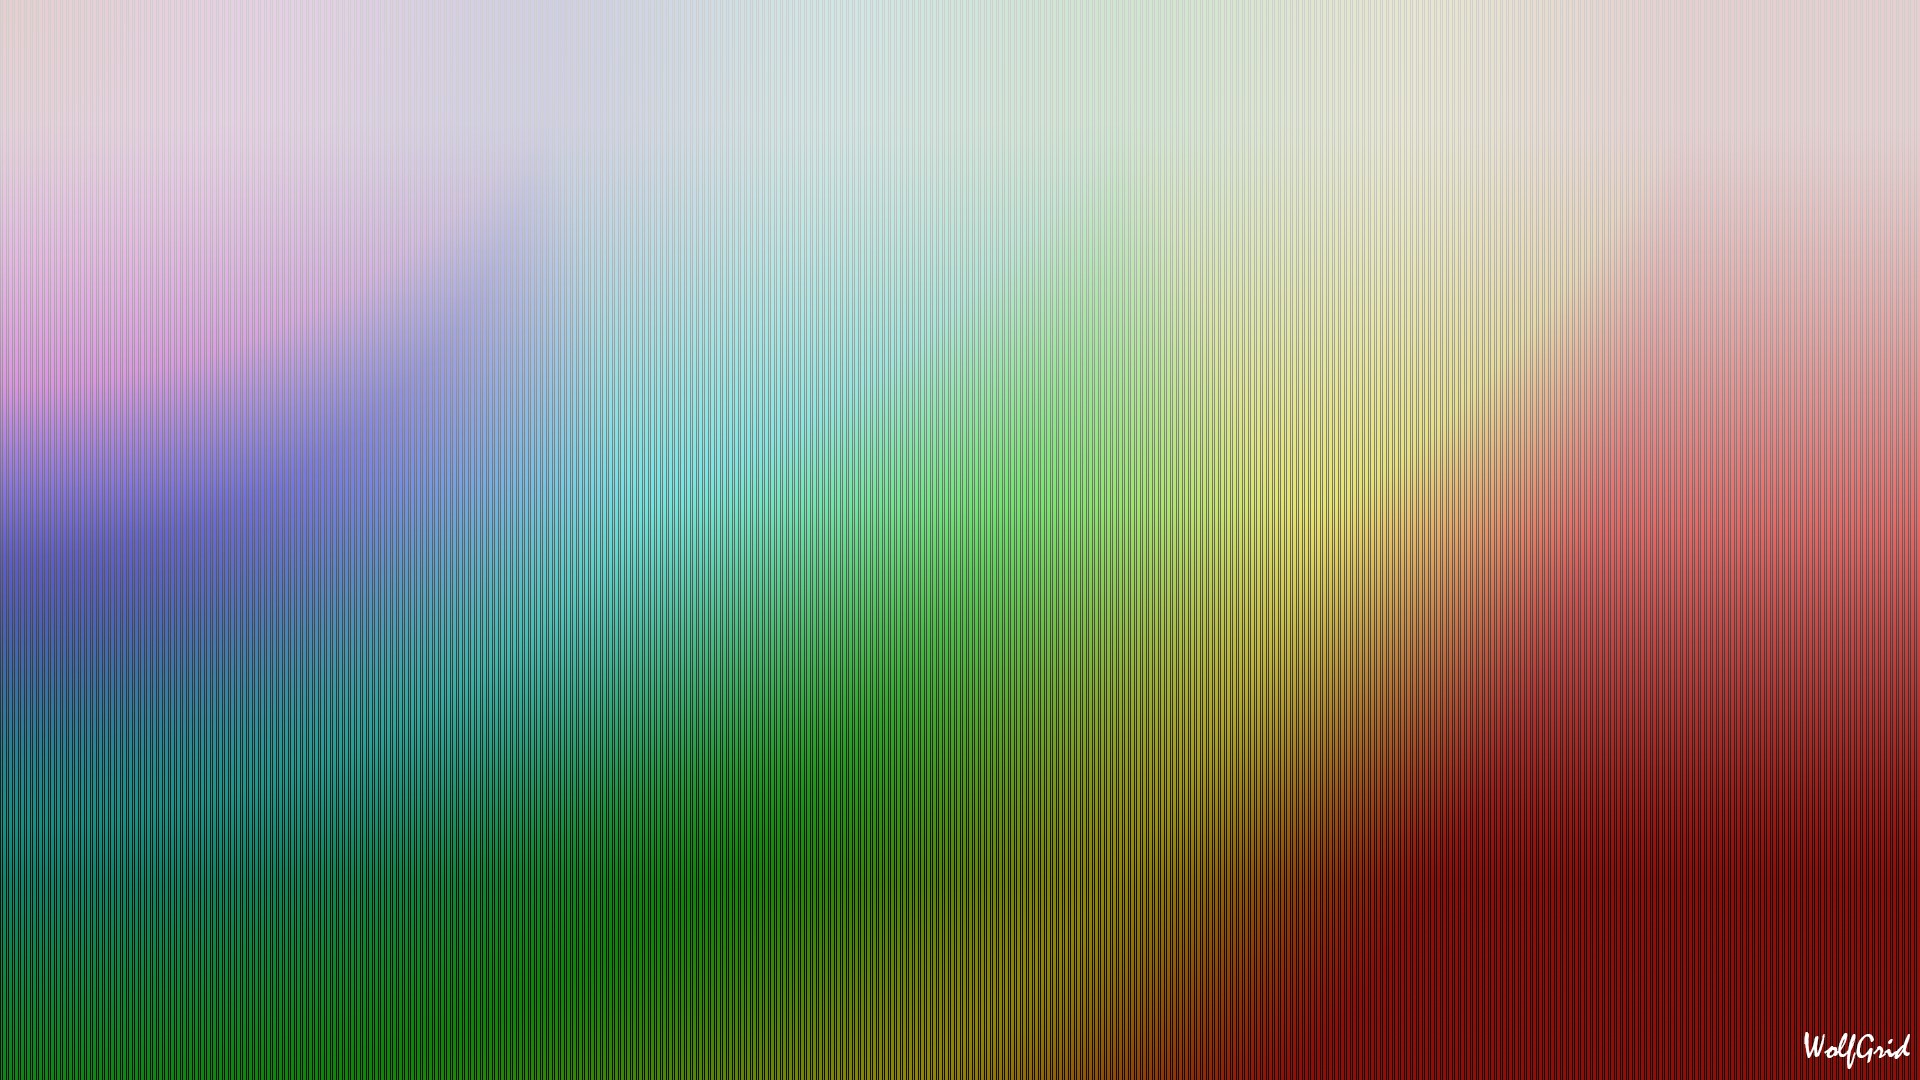 General 1920x1080 colorful abstract blurred texture gradient